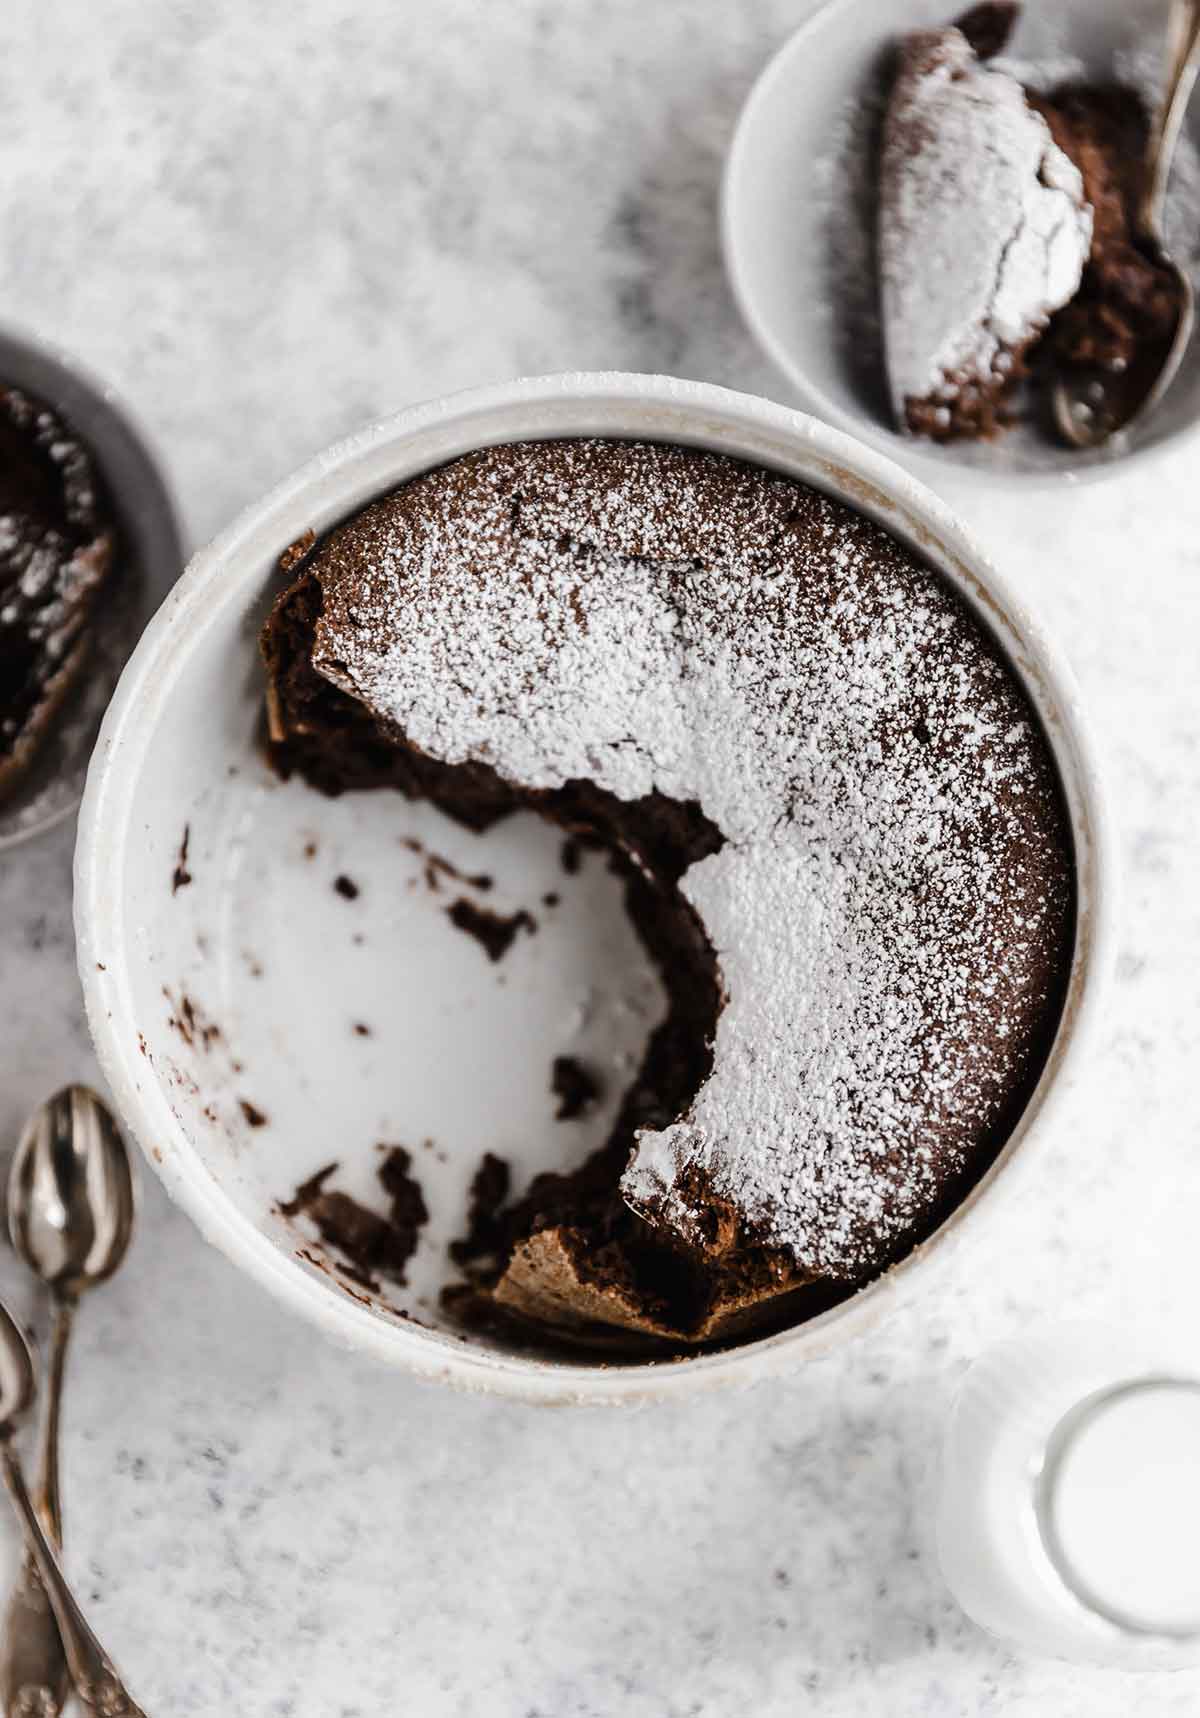 Overhead photo of chocolate souffle with powdered sugar in a souffle dish, with half scooped out.